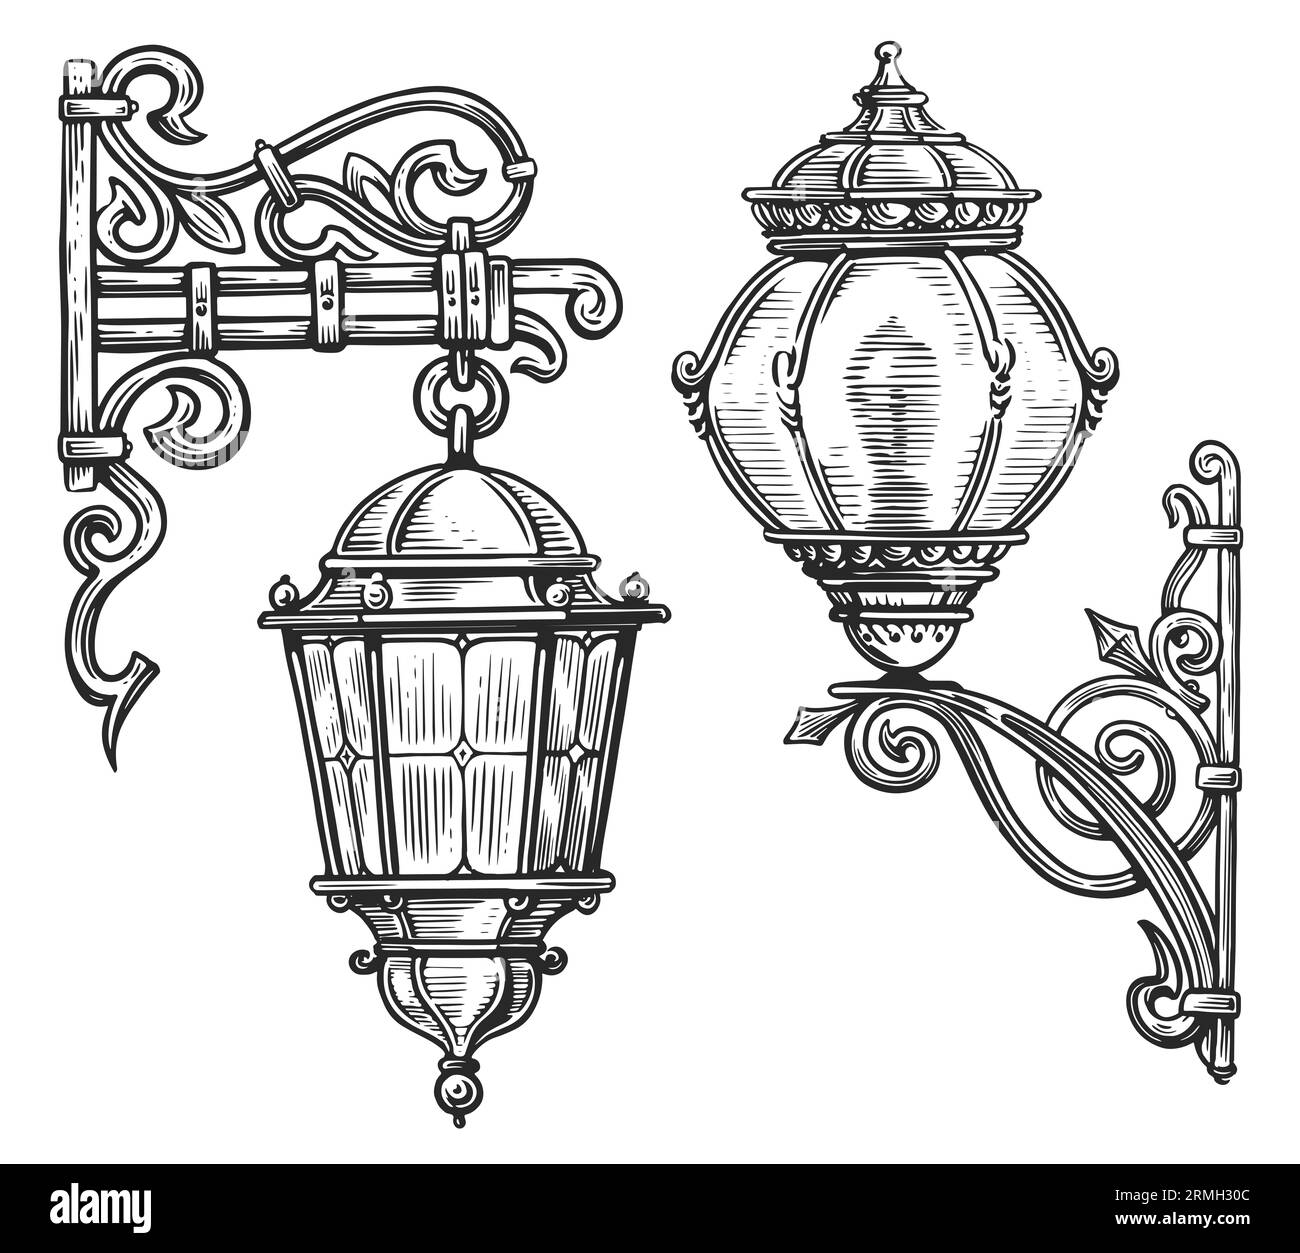 Old vintage lantern sketch illustration in engraving style. Wall street lamp isolated on white background Stock Photo